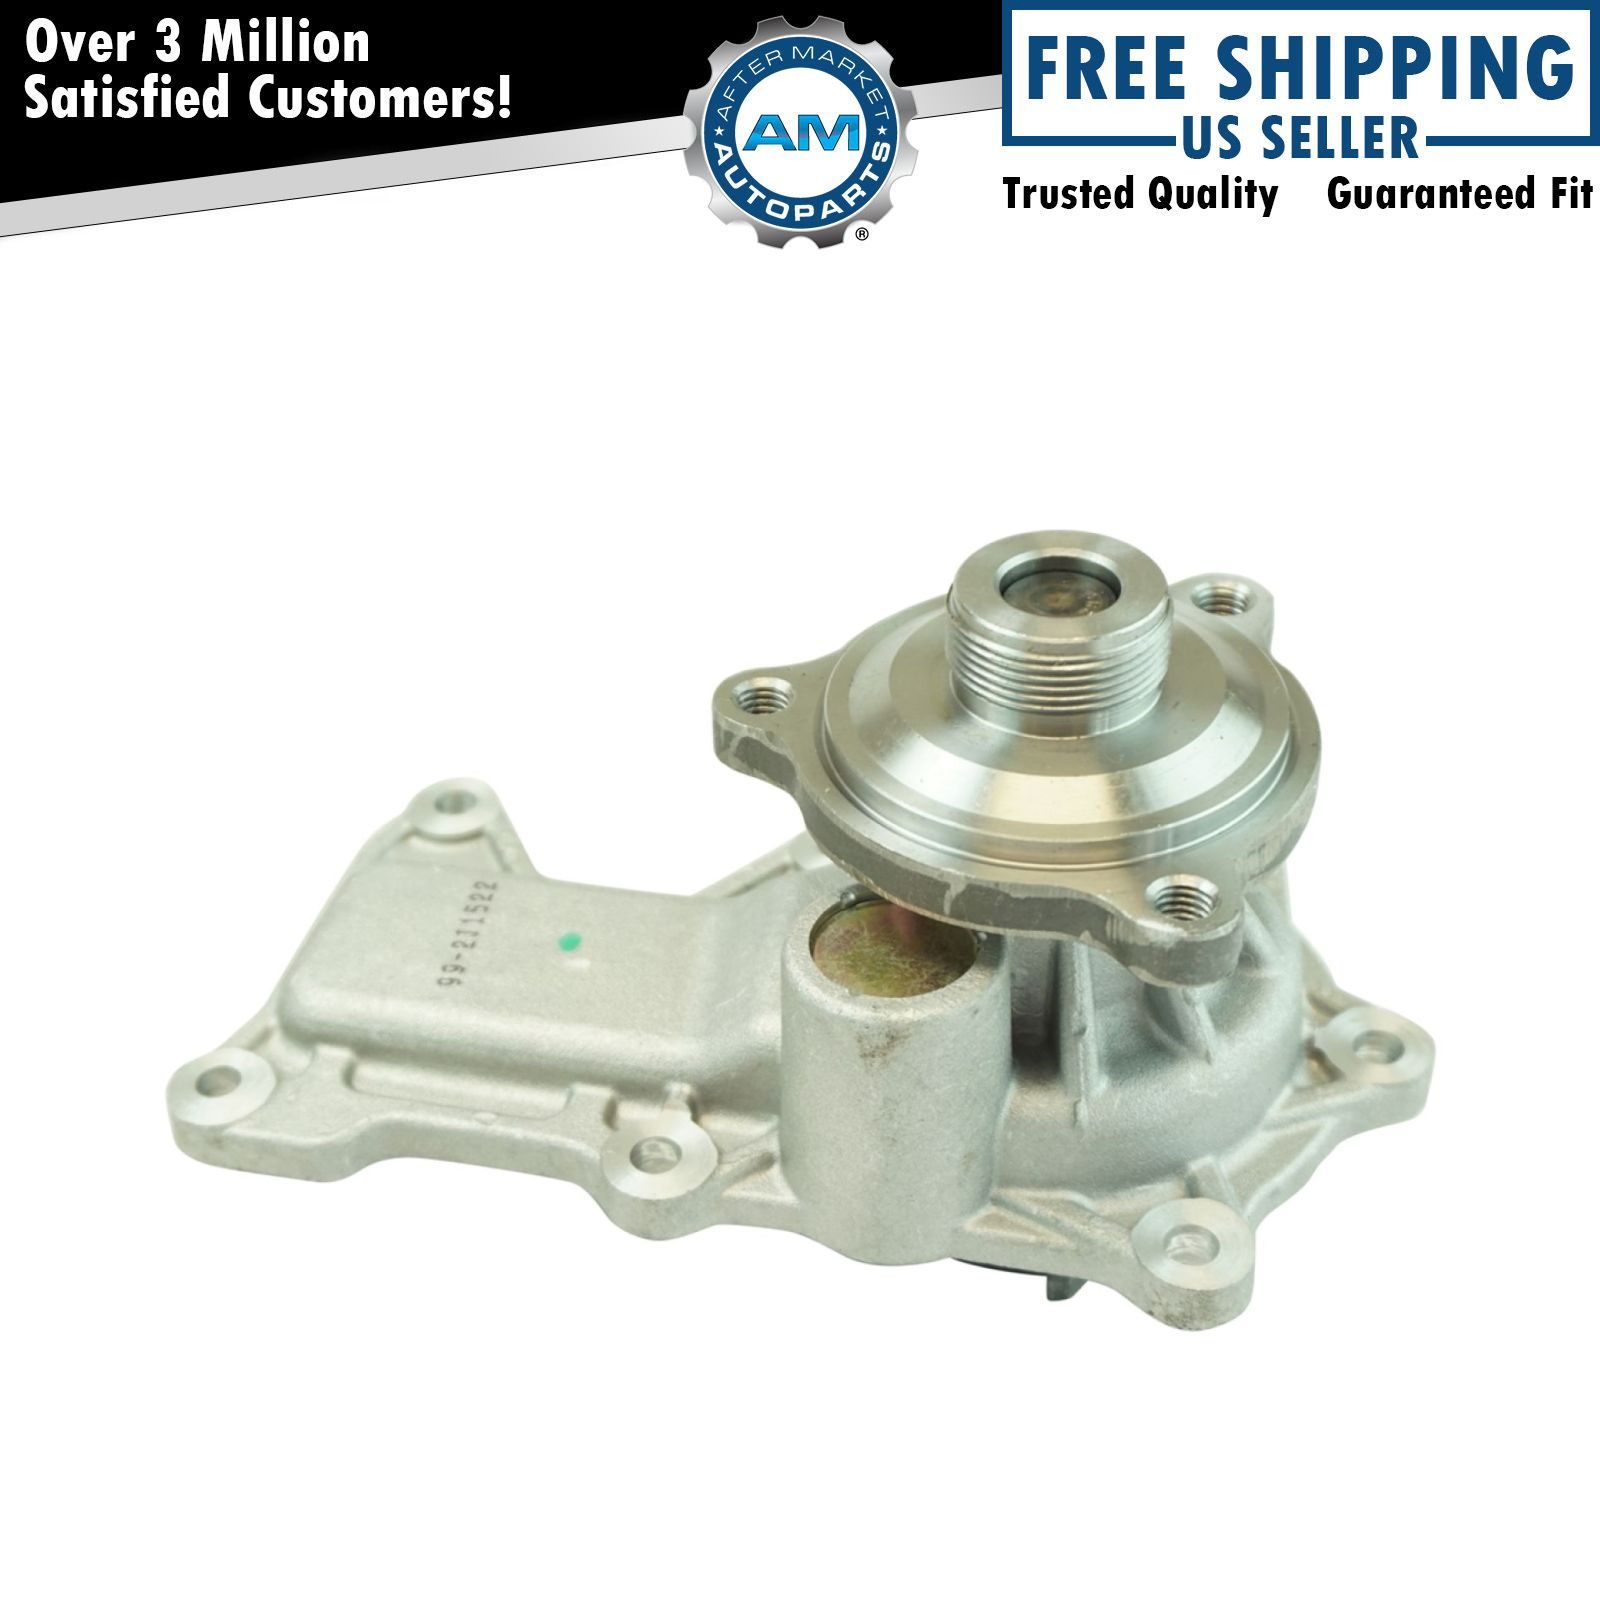 Engine Water Pump with Gasket for 07-11 Jeep Wrangler 3.8L SUV JK New